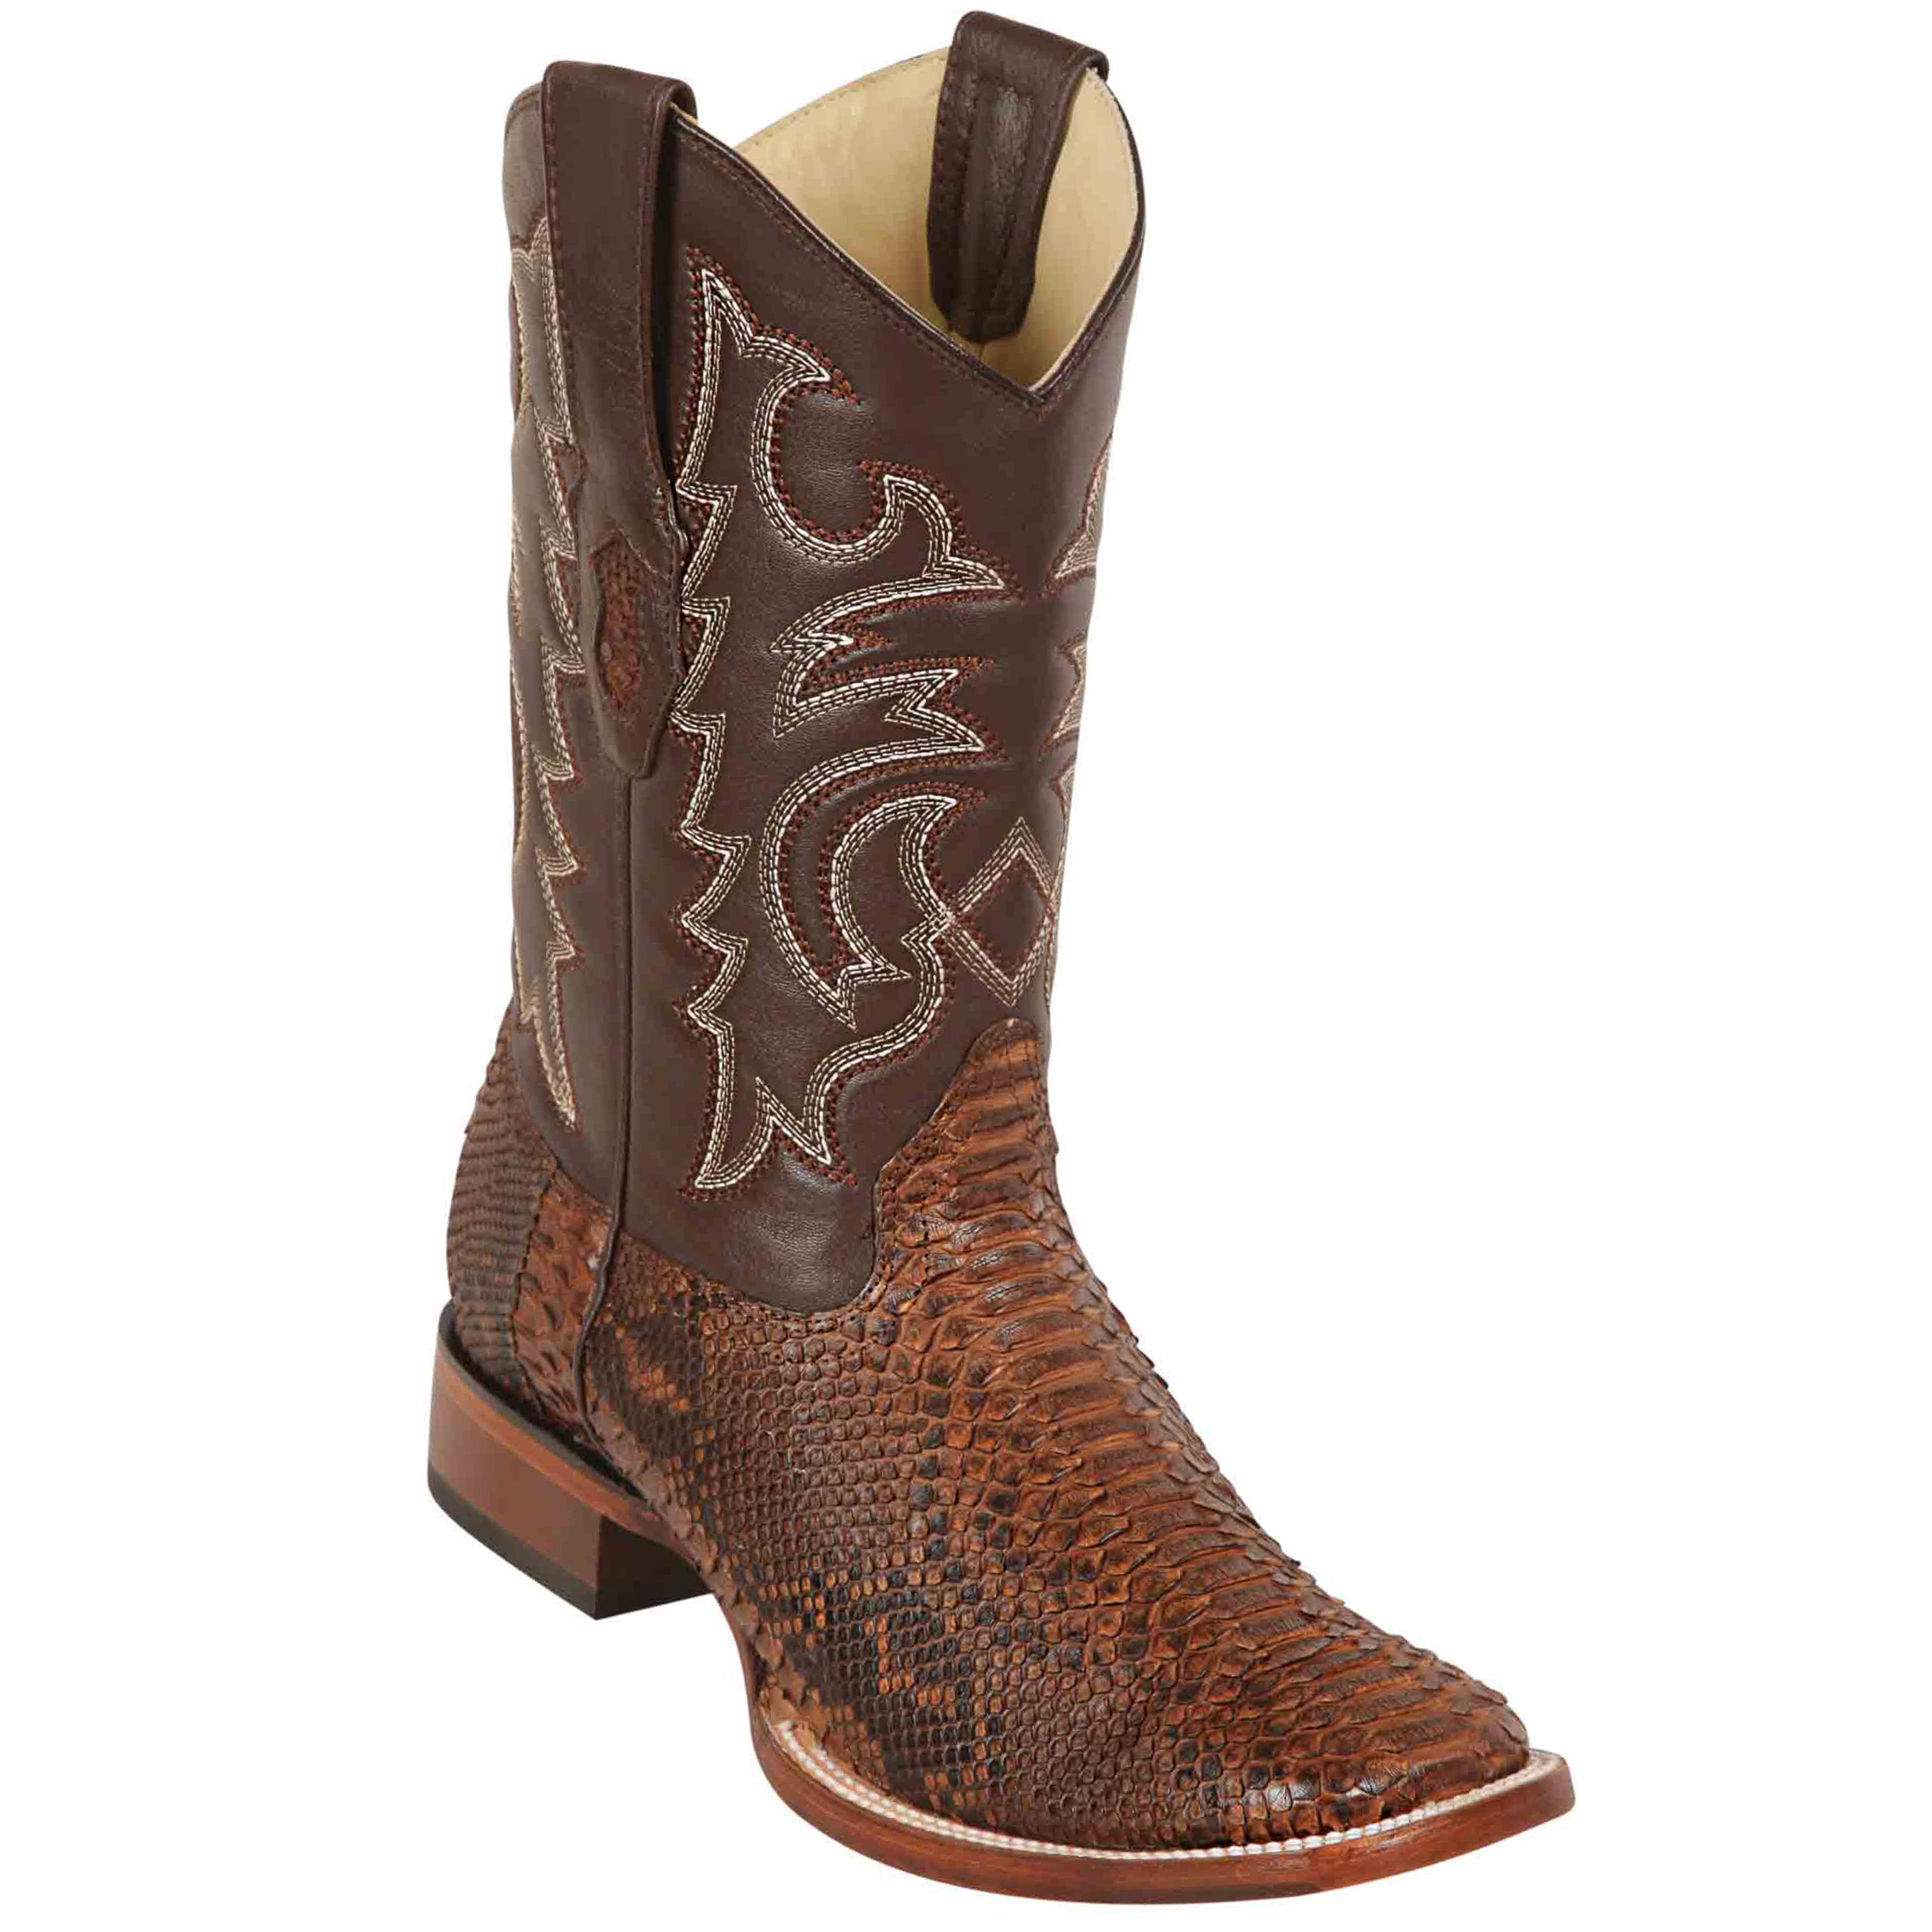 Mens Brown Square Toe Western Boots Snakeskin - Los Altos Boots